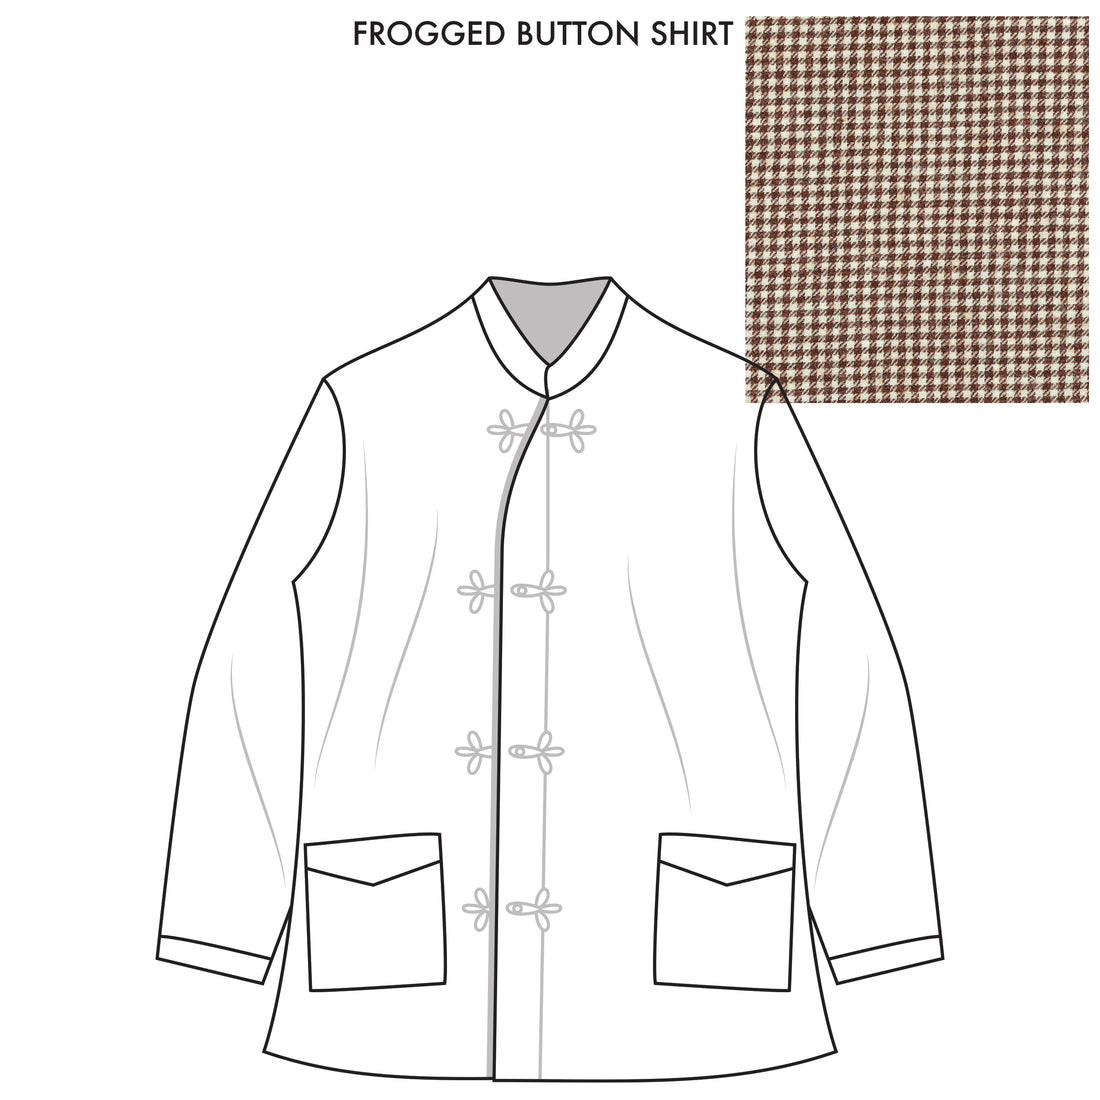 Bryceland’s Frogged Button Shirt Made-to-order Brown Puppytooth